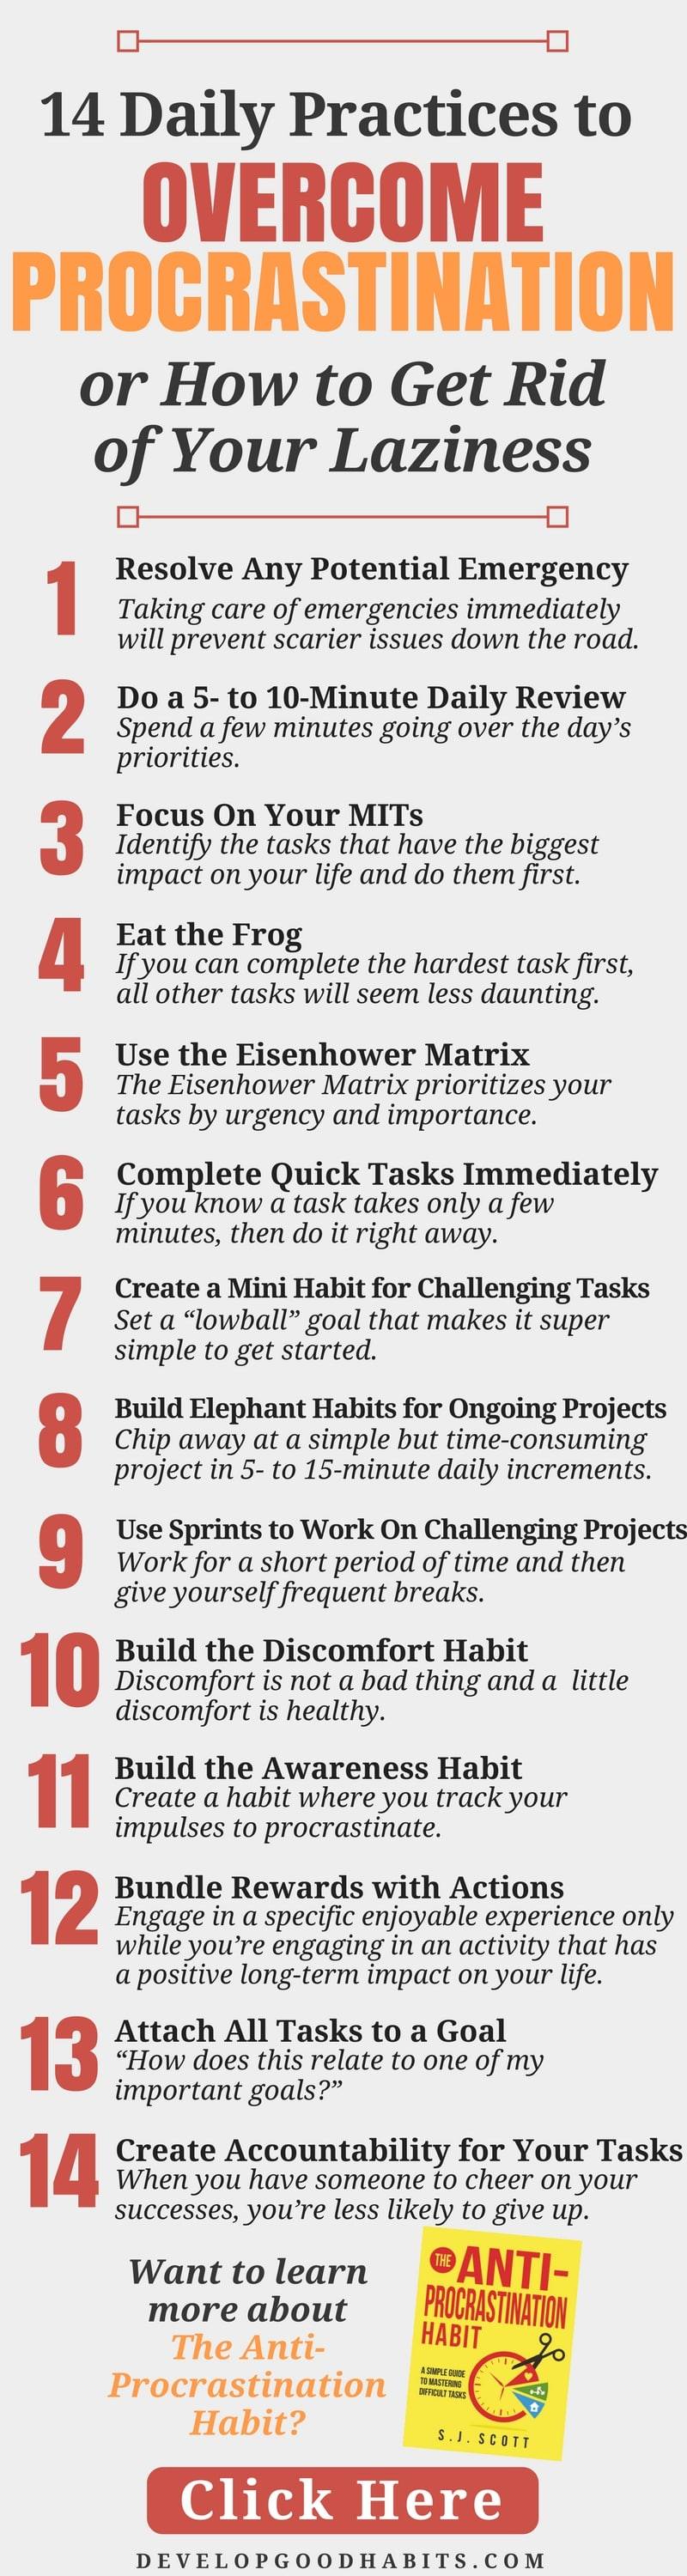 14 Daily Practices to Overcome #Procrastination | Increase productivity at work | #productivity